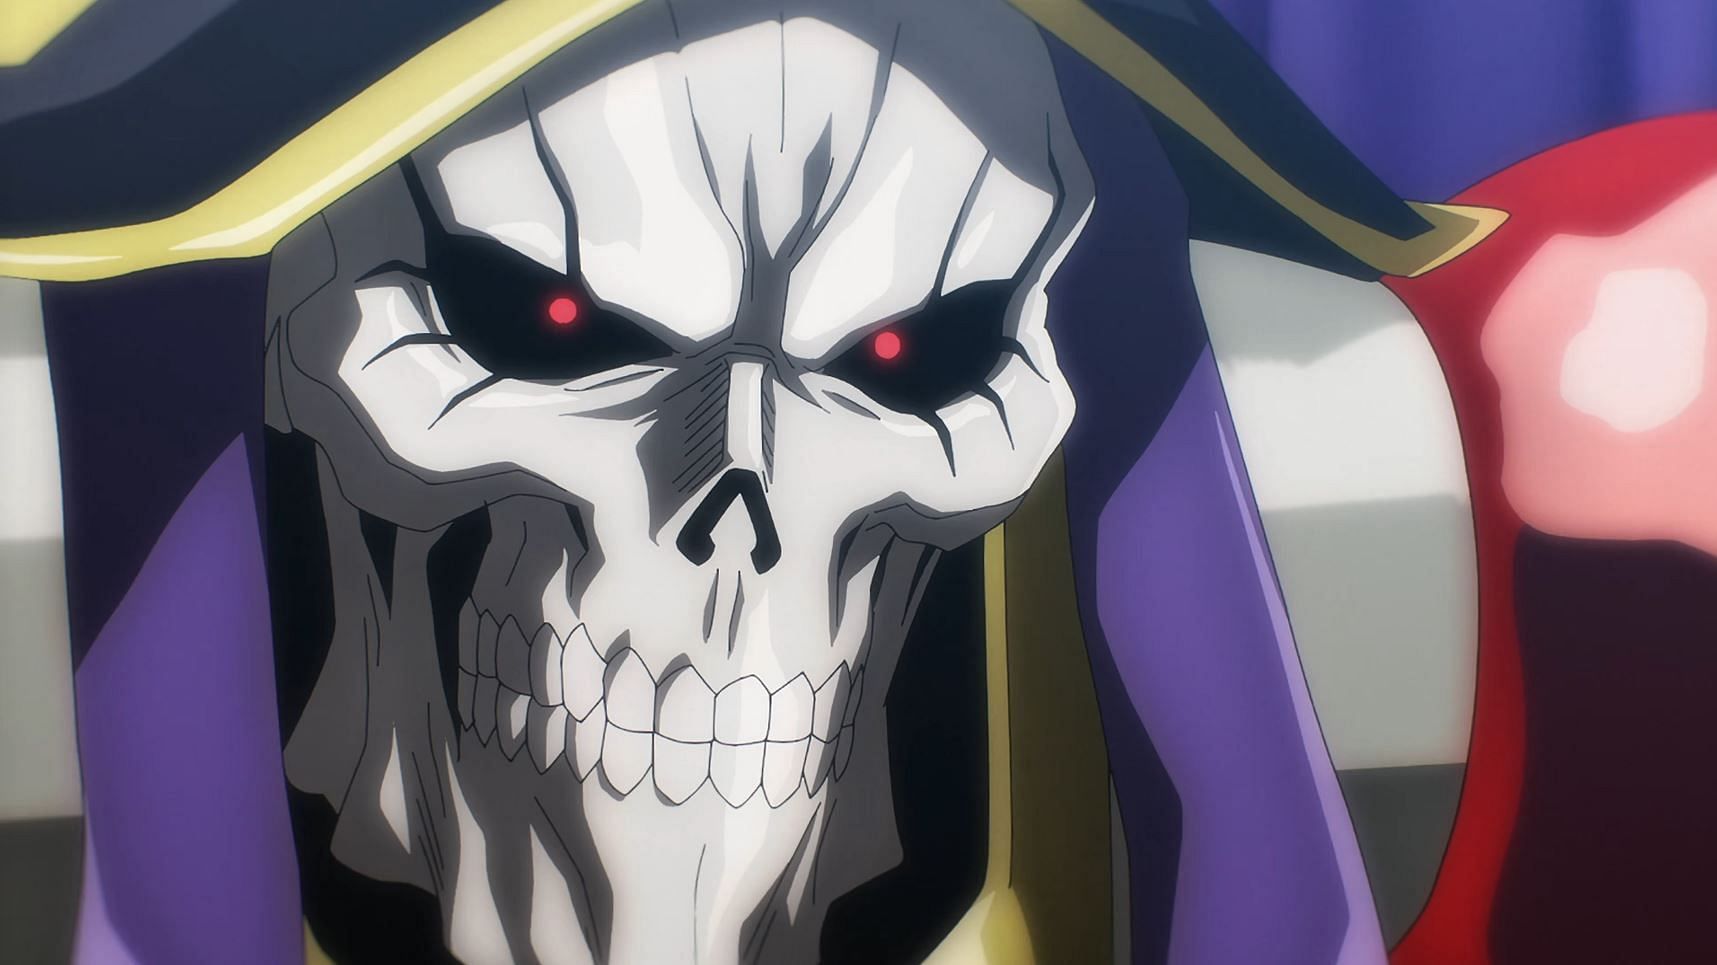 Overlord IV Ep. 1  Sorcerer Kingdom Ains Ooal Gown: Ains Ooal